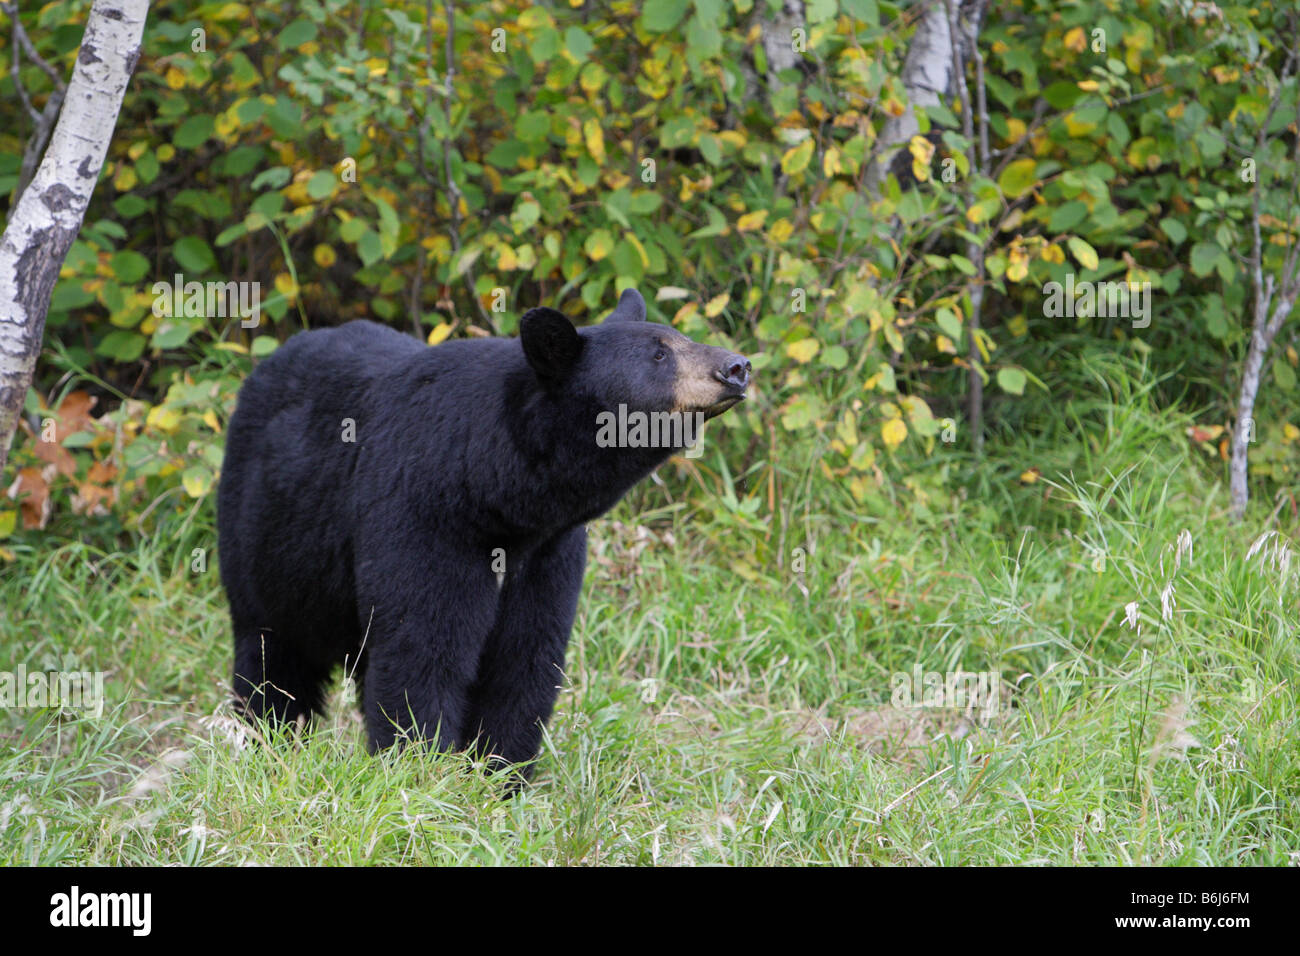 Black Bear Ursus americanus female standing in a forest clearing scenting the air Stock Photo